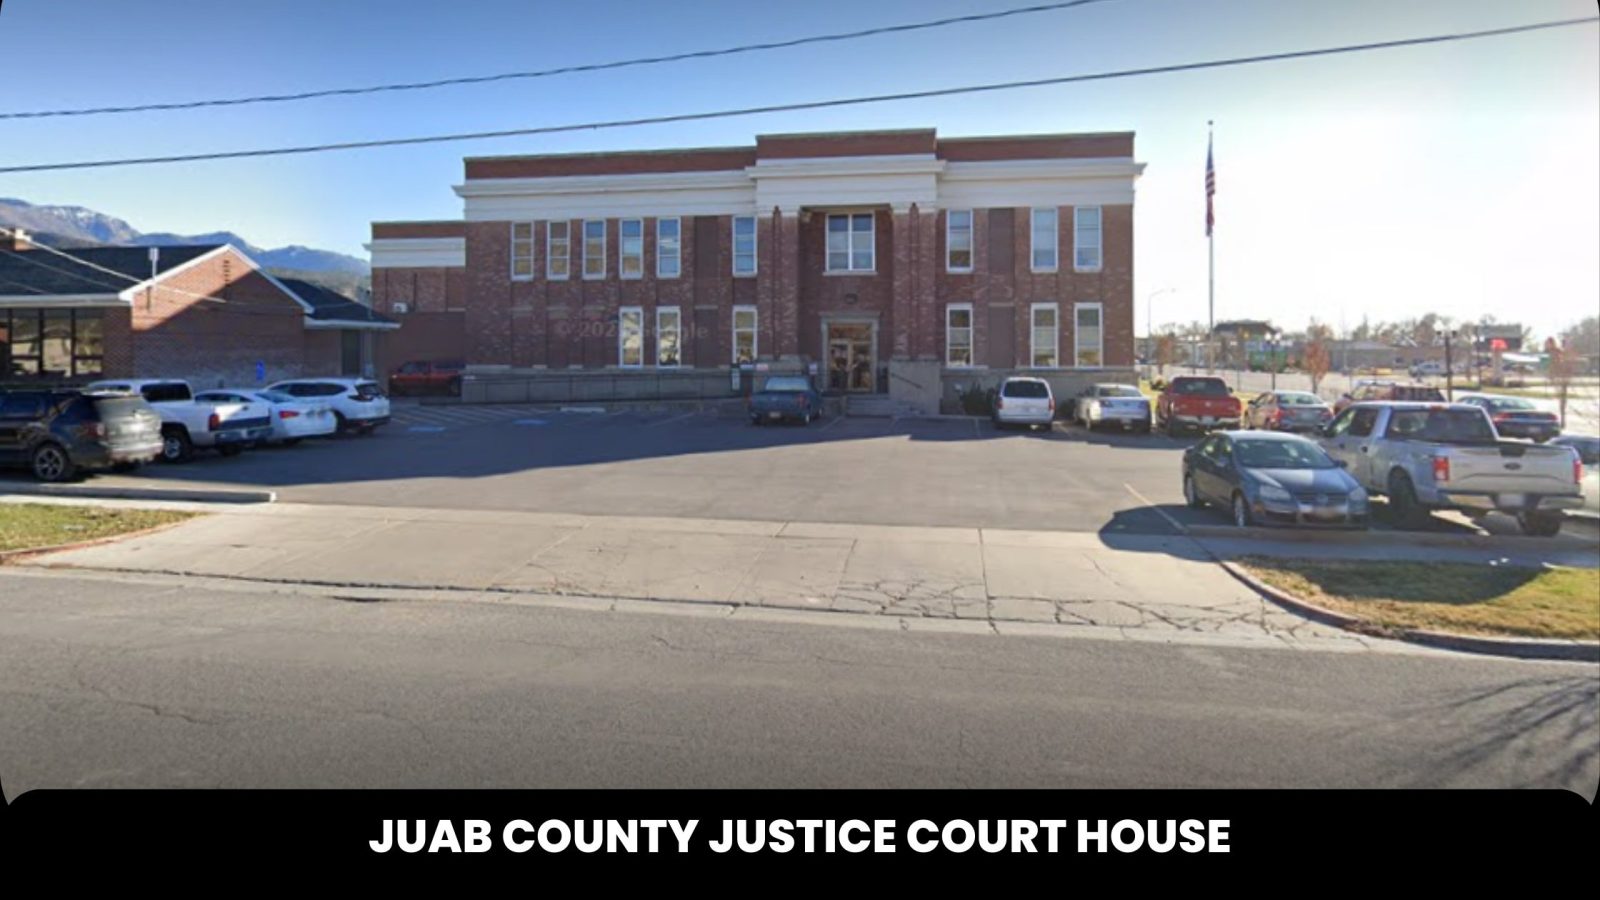 Juab County Justice Court House 2